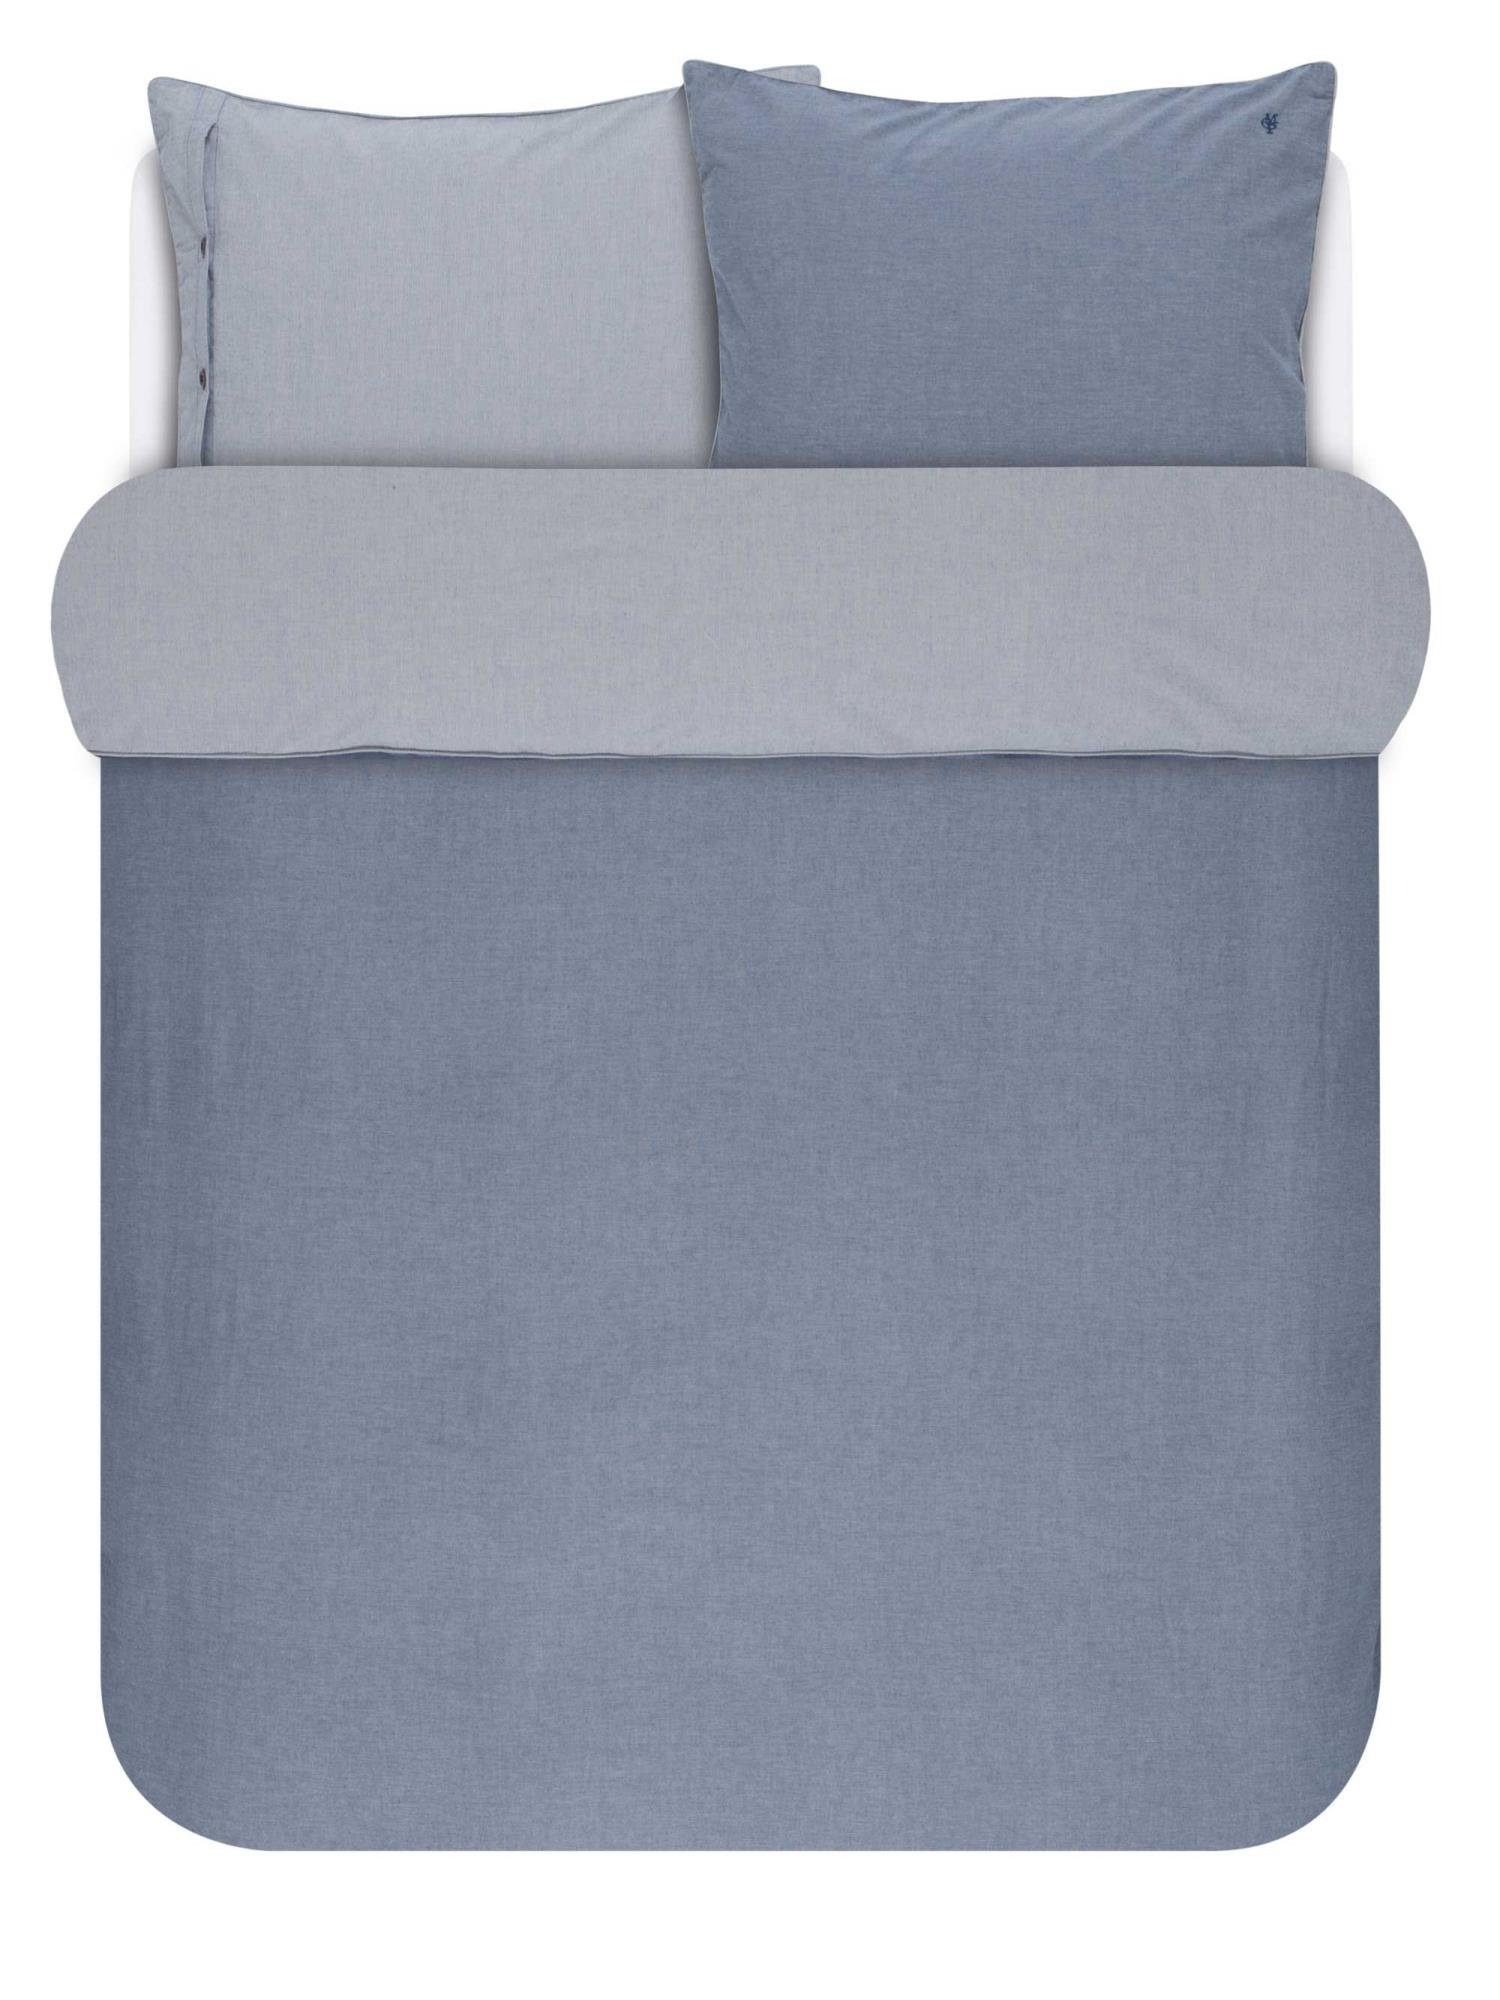 Bettwäsche Washed chambray, Marc O'Polo Home, Baumwolle, 2 teilig, unifarben